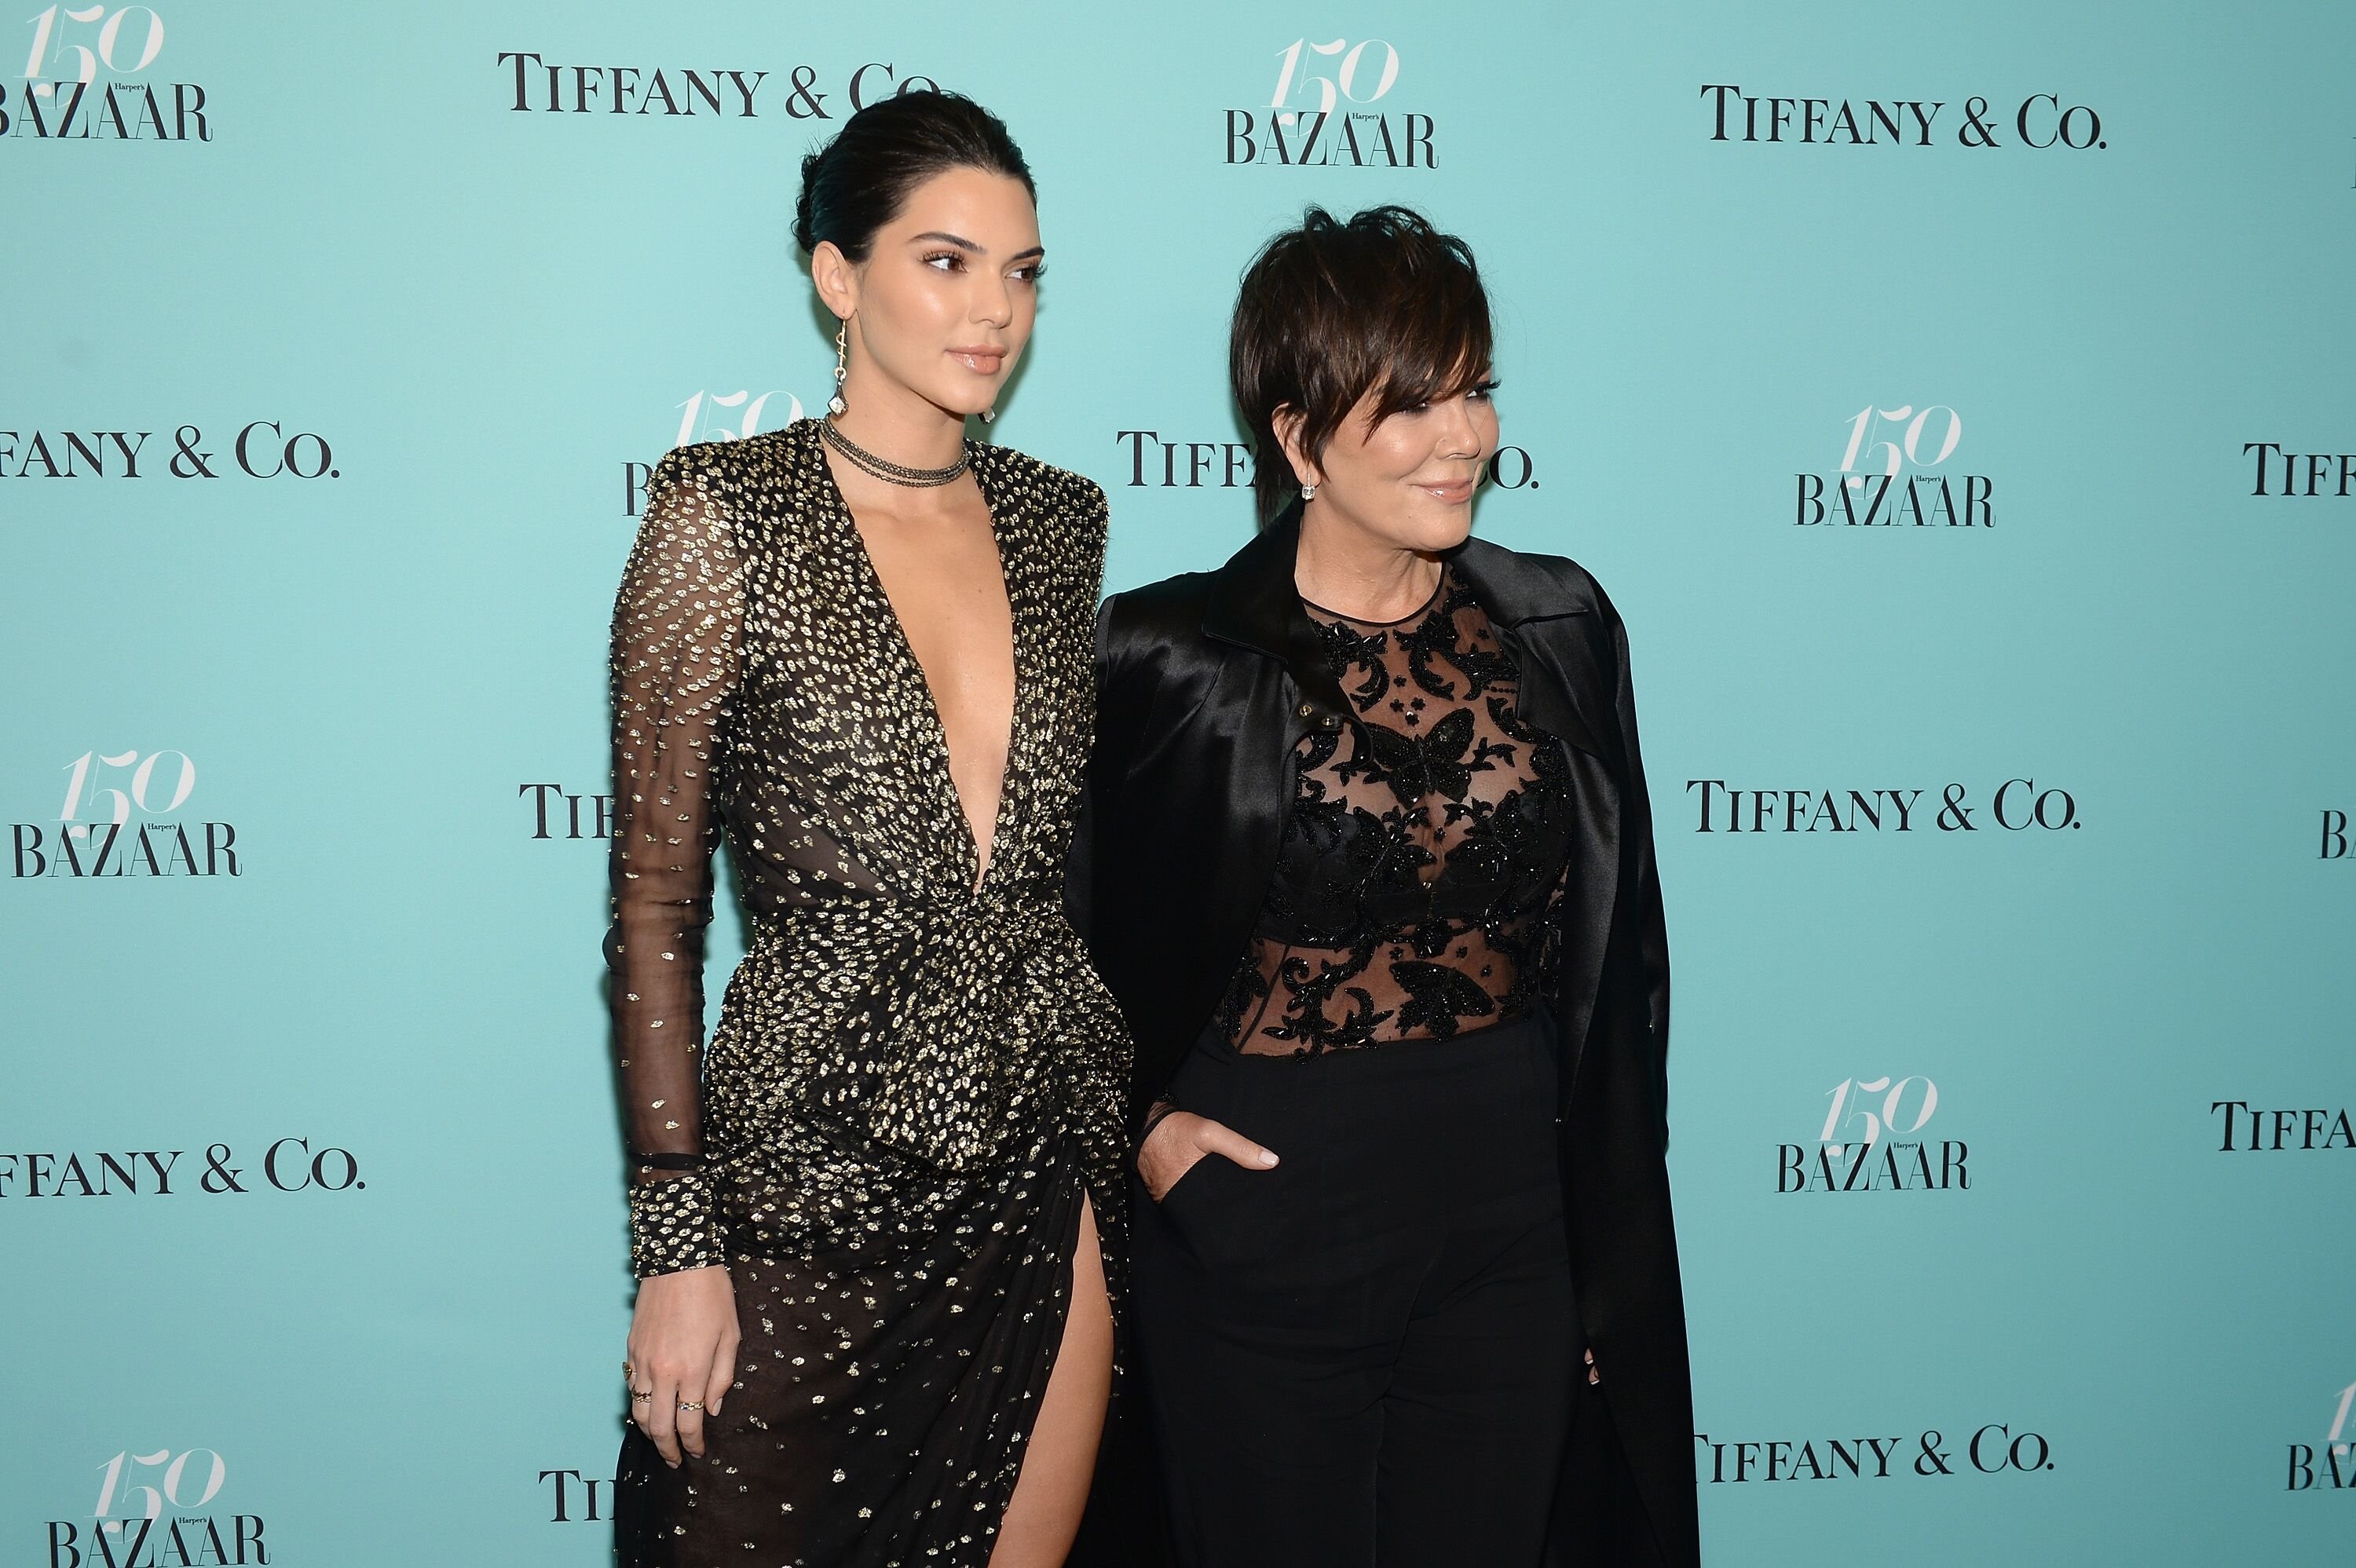 Kendall Jenner and Kris Jenner at Harper's BAZAAR 150th Anniversary Event on April 19, 2017, in New York City | Photo: Andrew Toth/Getty Images